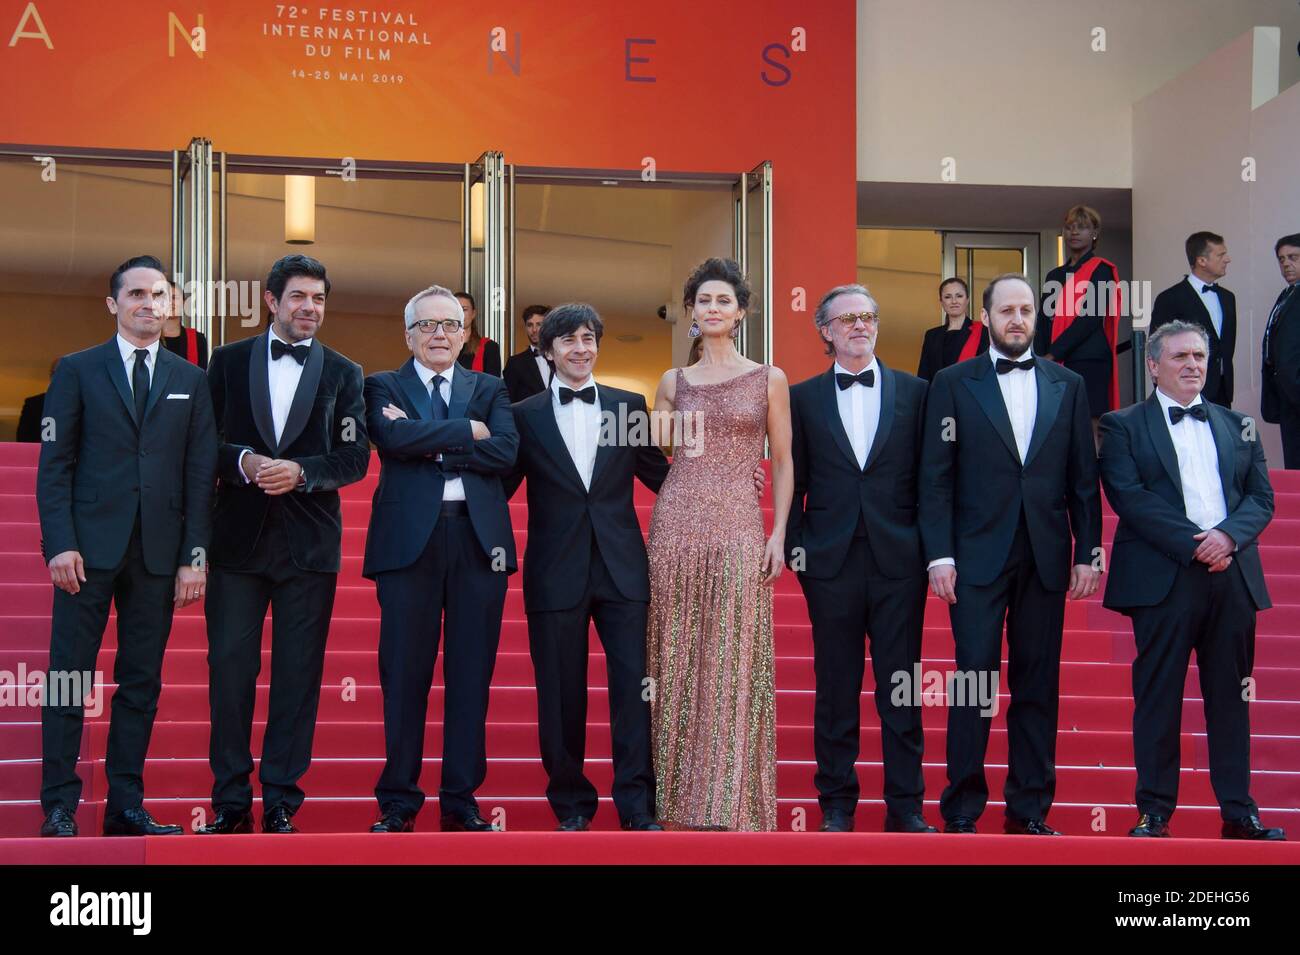 Pierfrancesco Favino, Maria Fernanda Candido, Marco Bellocchio, Luigi Lo Cascio, Fausto Russo Alesi and guests arriving on the red carpet of 'The Traitor (Il Traditore)' screening held at the Palais Des Festivals in Cannes, France on May 23, 2019 as part of the 72th Cannes Film Festival. Photo by Nicolas Genin/ABACAPRESS.COM Stock Photo